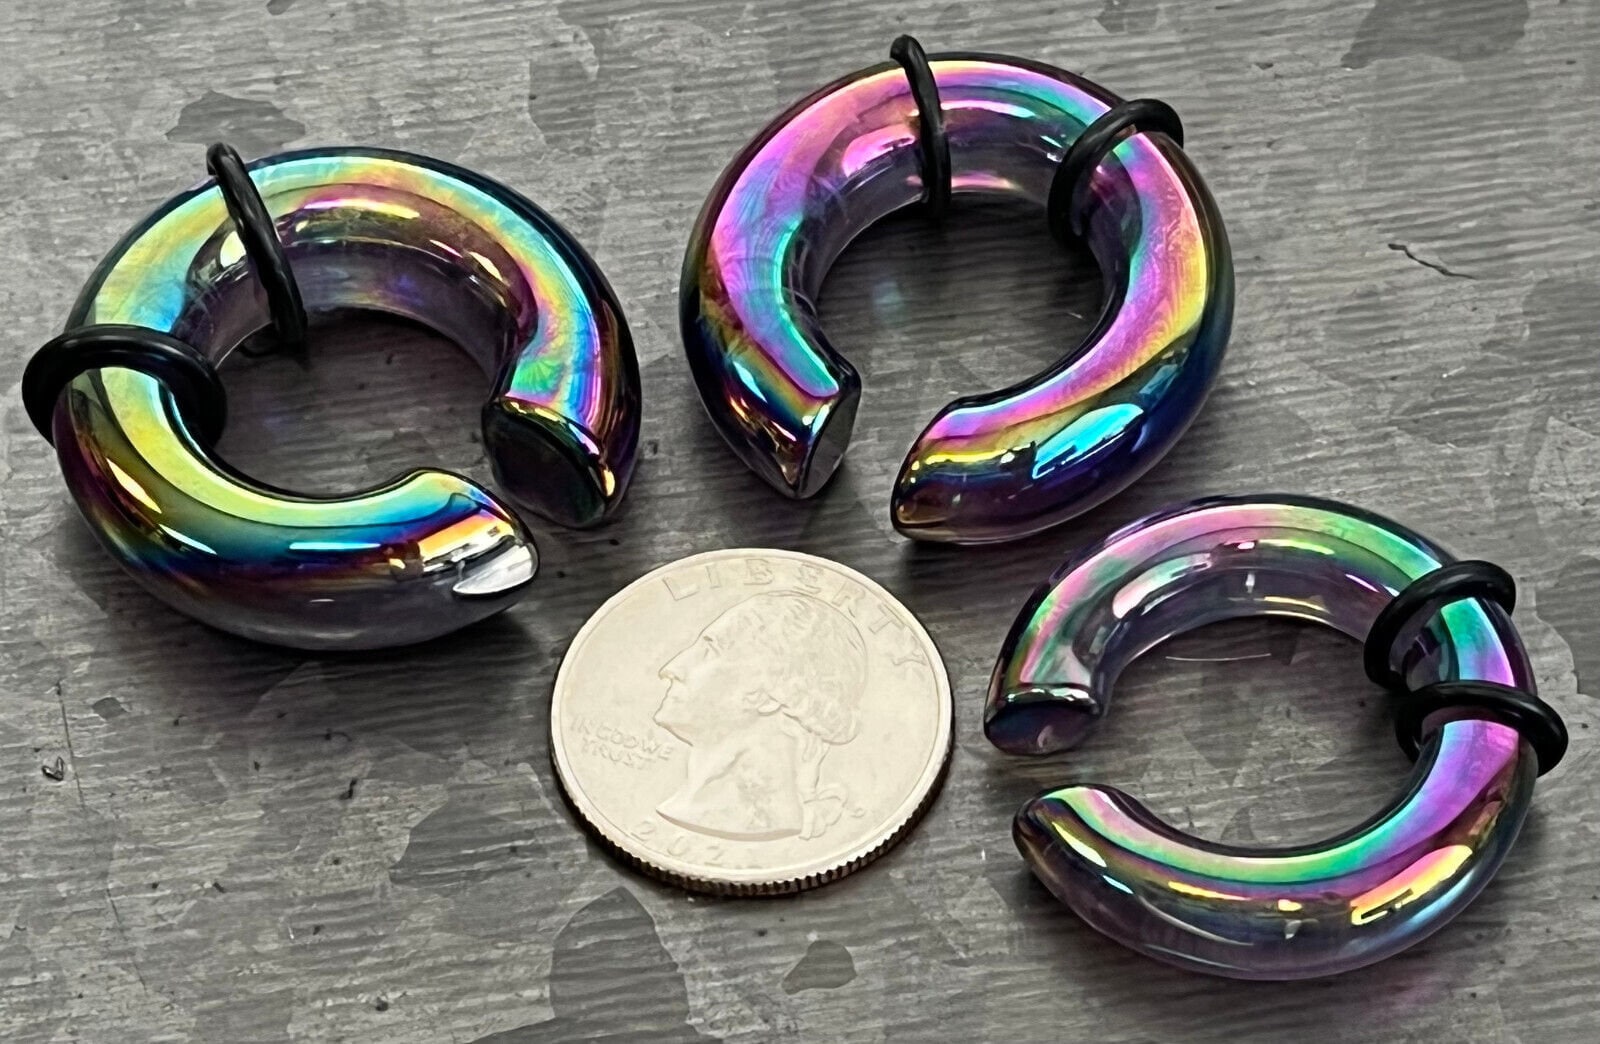 PAIR of Beautiful Purple Lucifer Glass Hoop Plugs/Tapers Hangers - 7.5mm and 9mm Available!